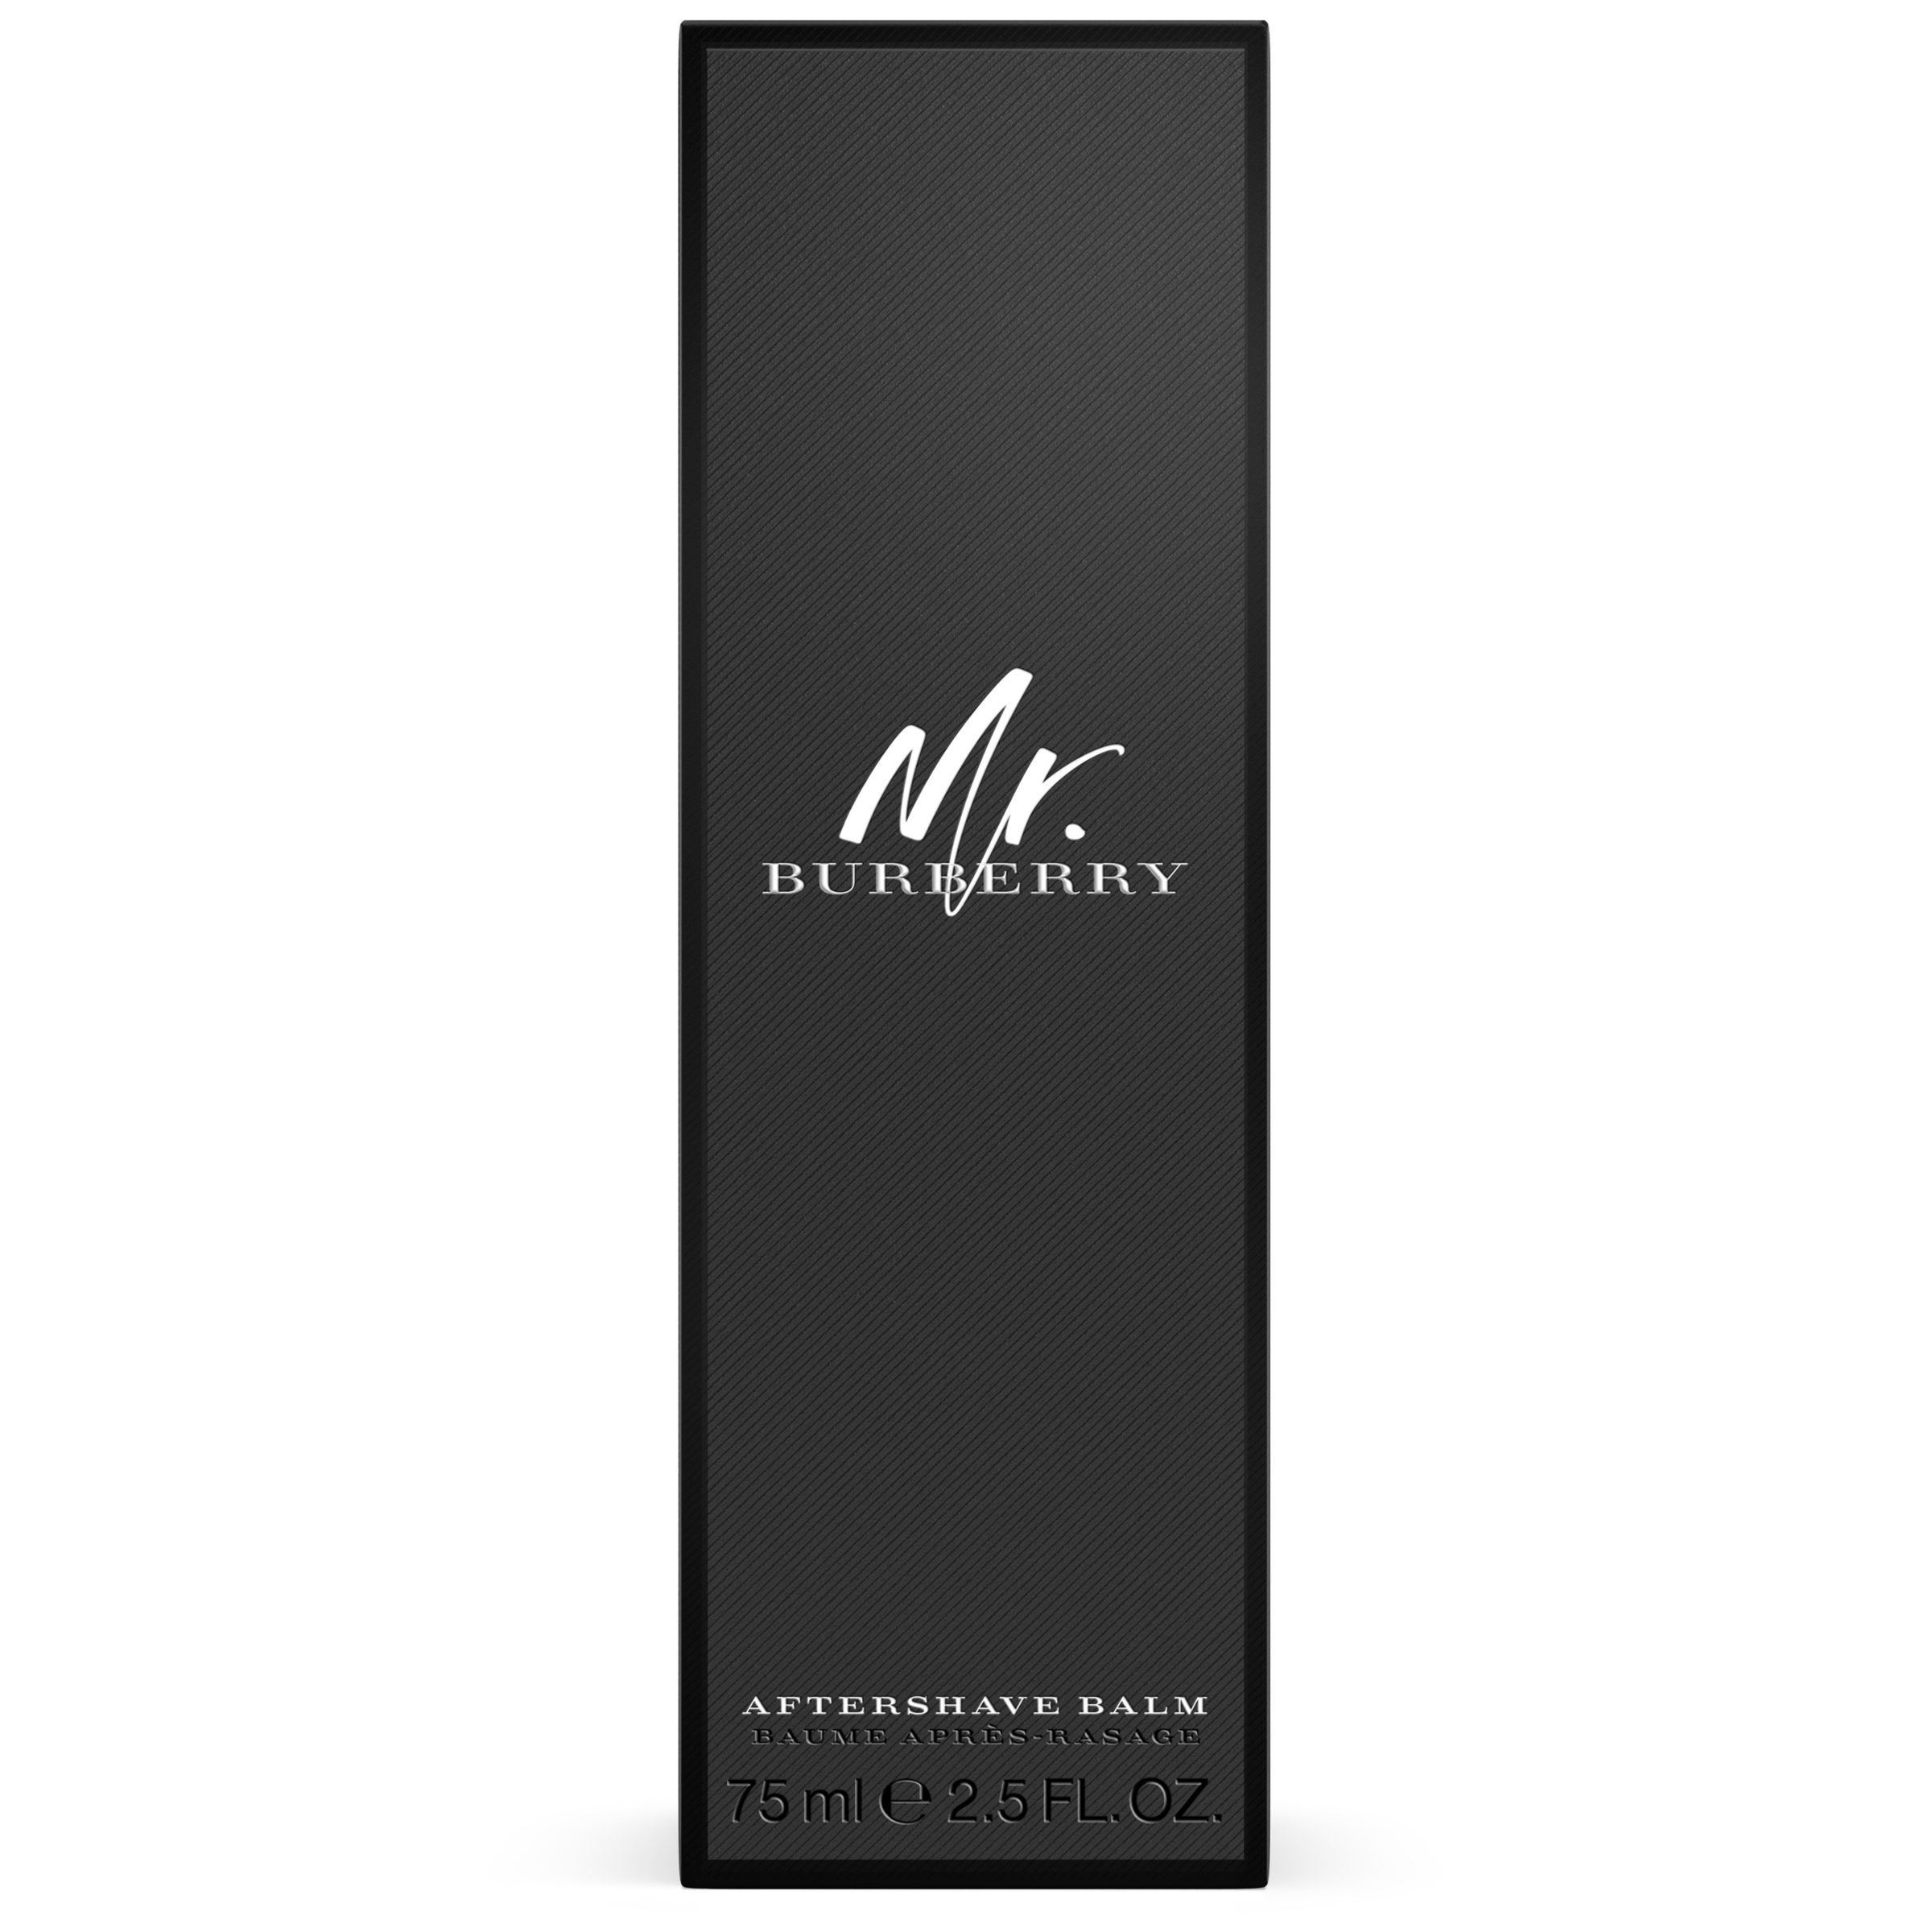 burberry aftershave balm